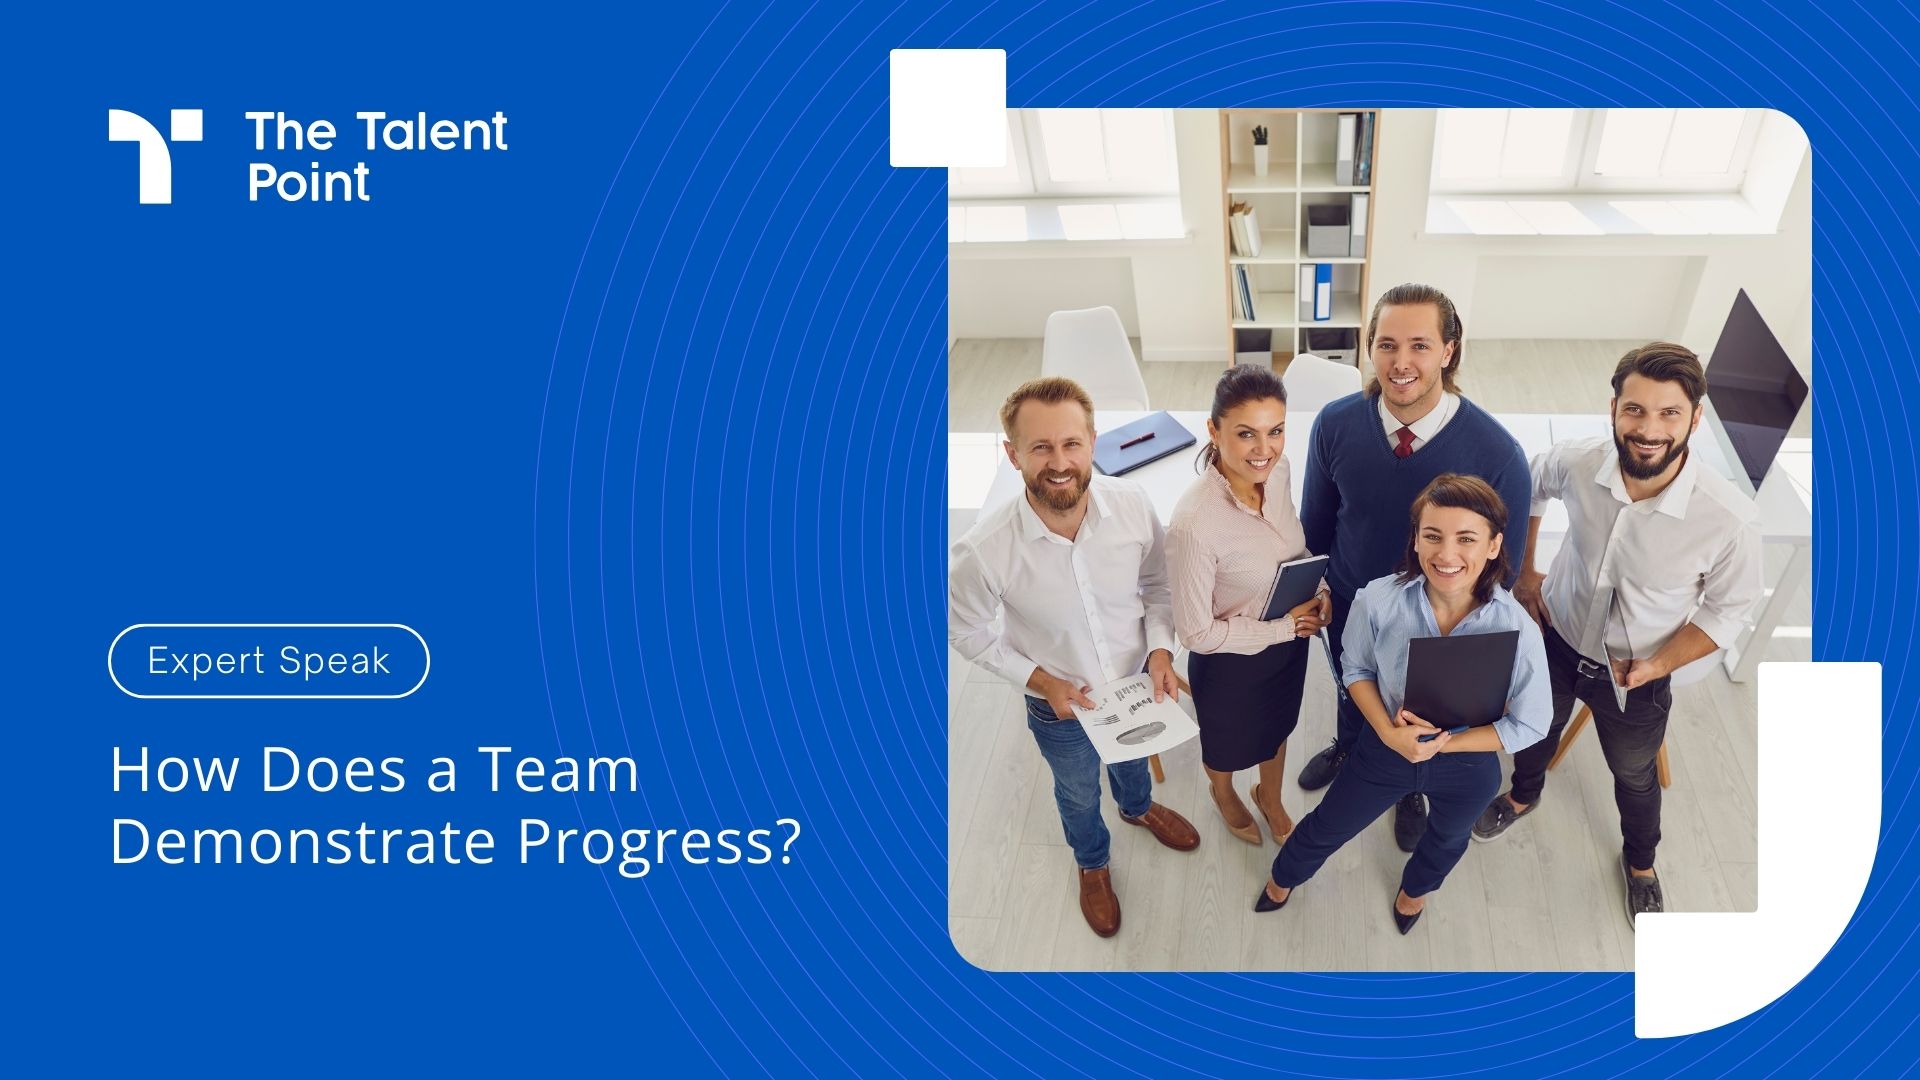 How Does a Team Demonstrate Progress?